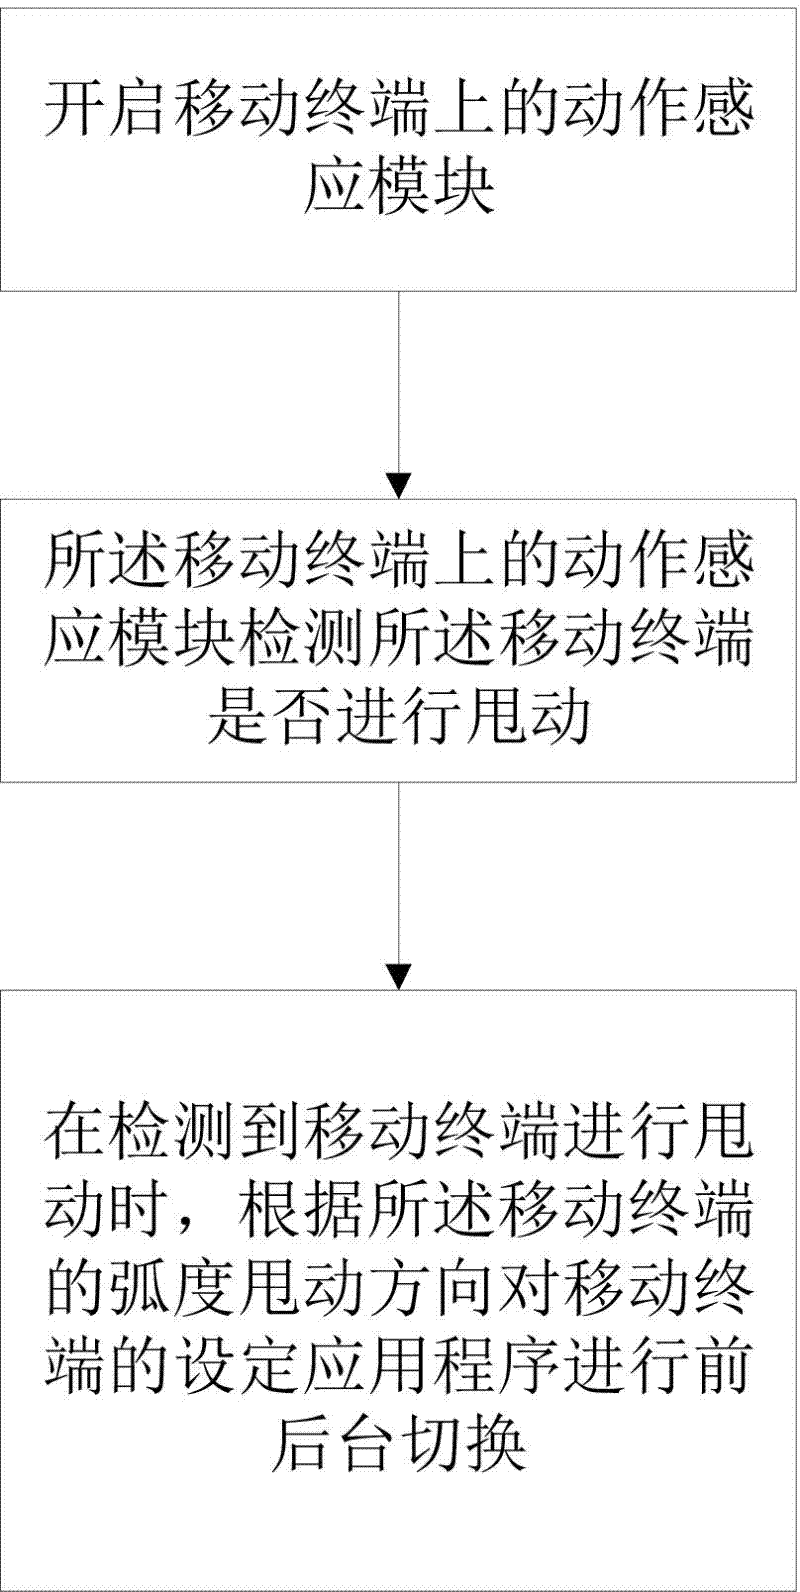 Application program switching method and device based on mobile terminal